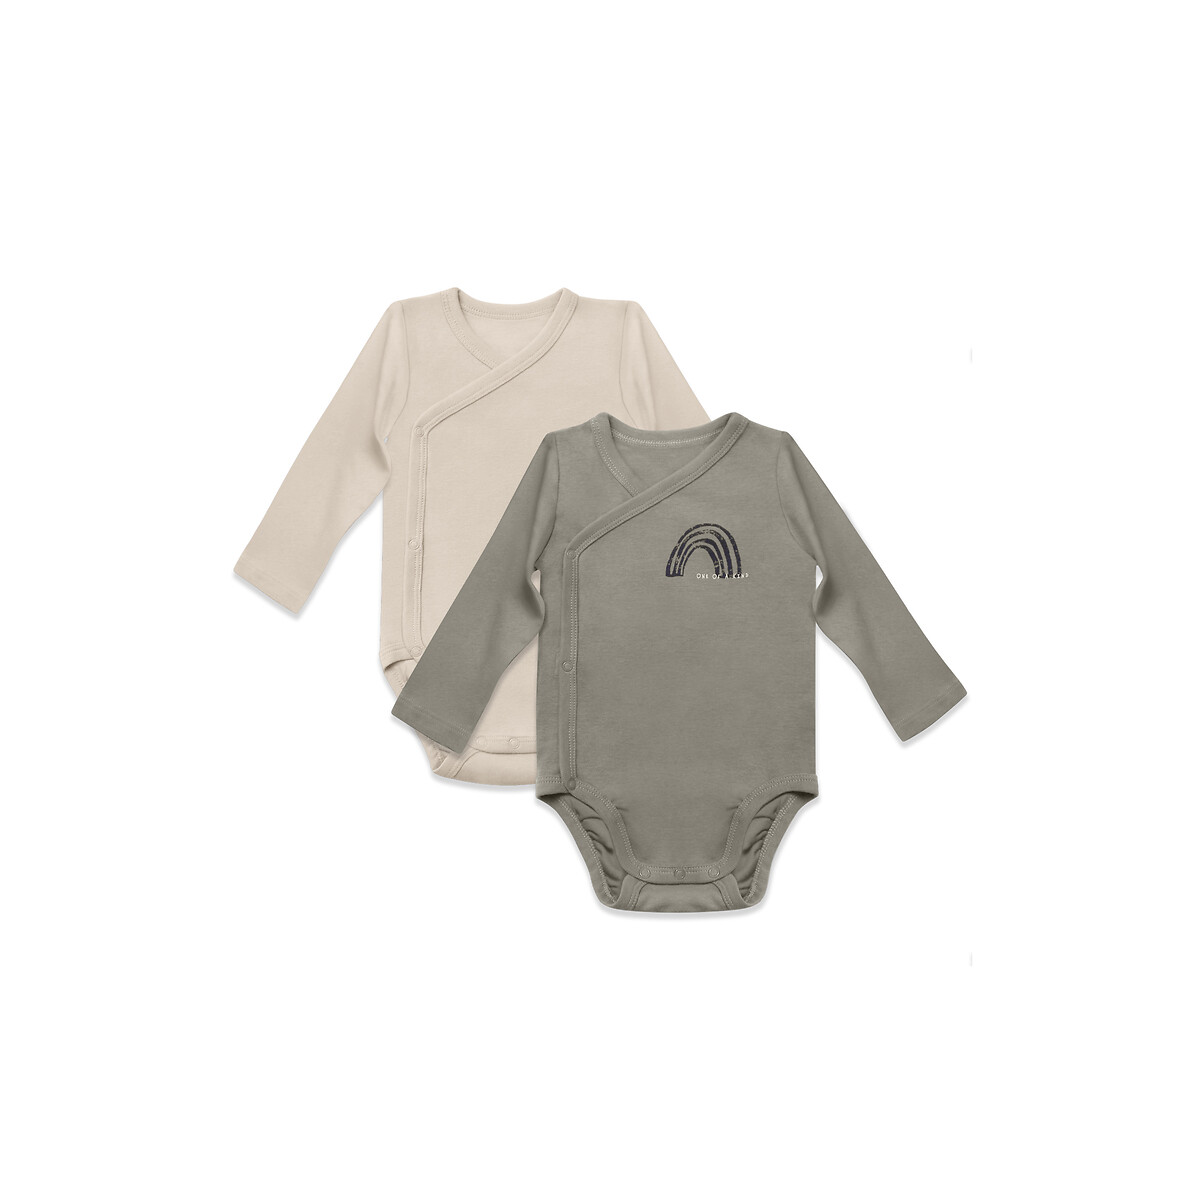 Pack of 2 Wrapover Style Bodysuits in Cotton with Long Sleeves